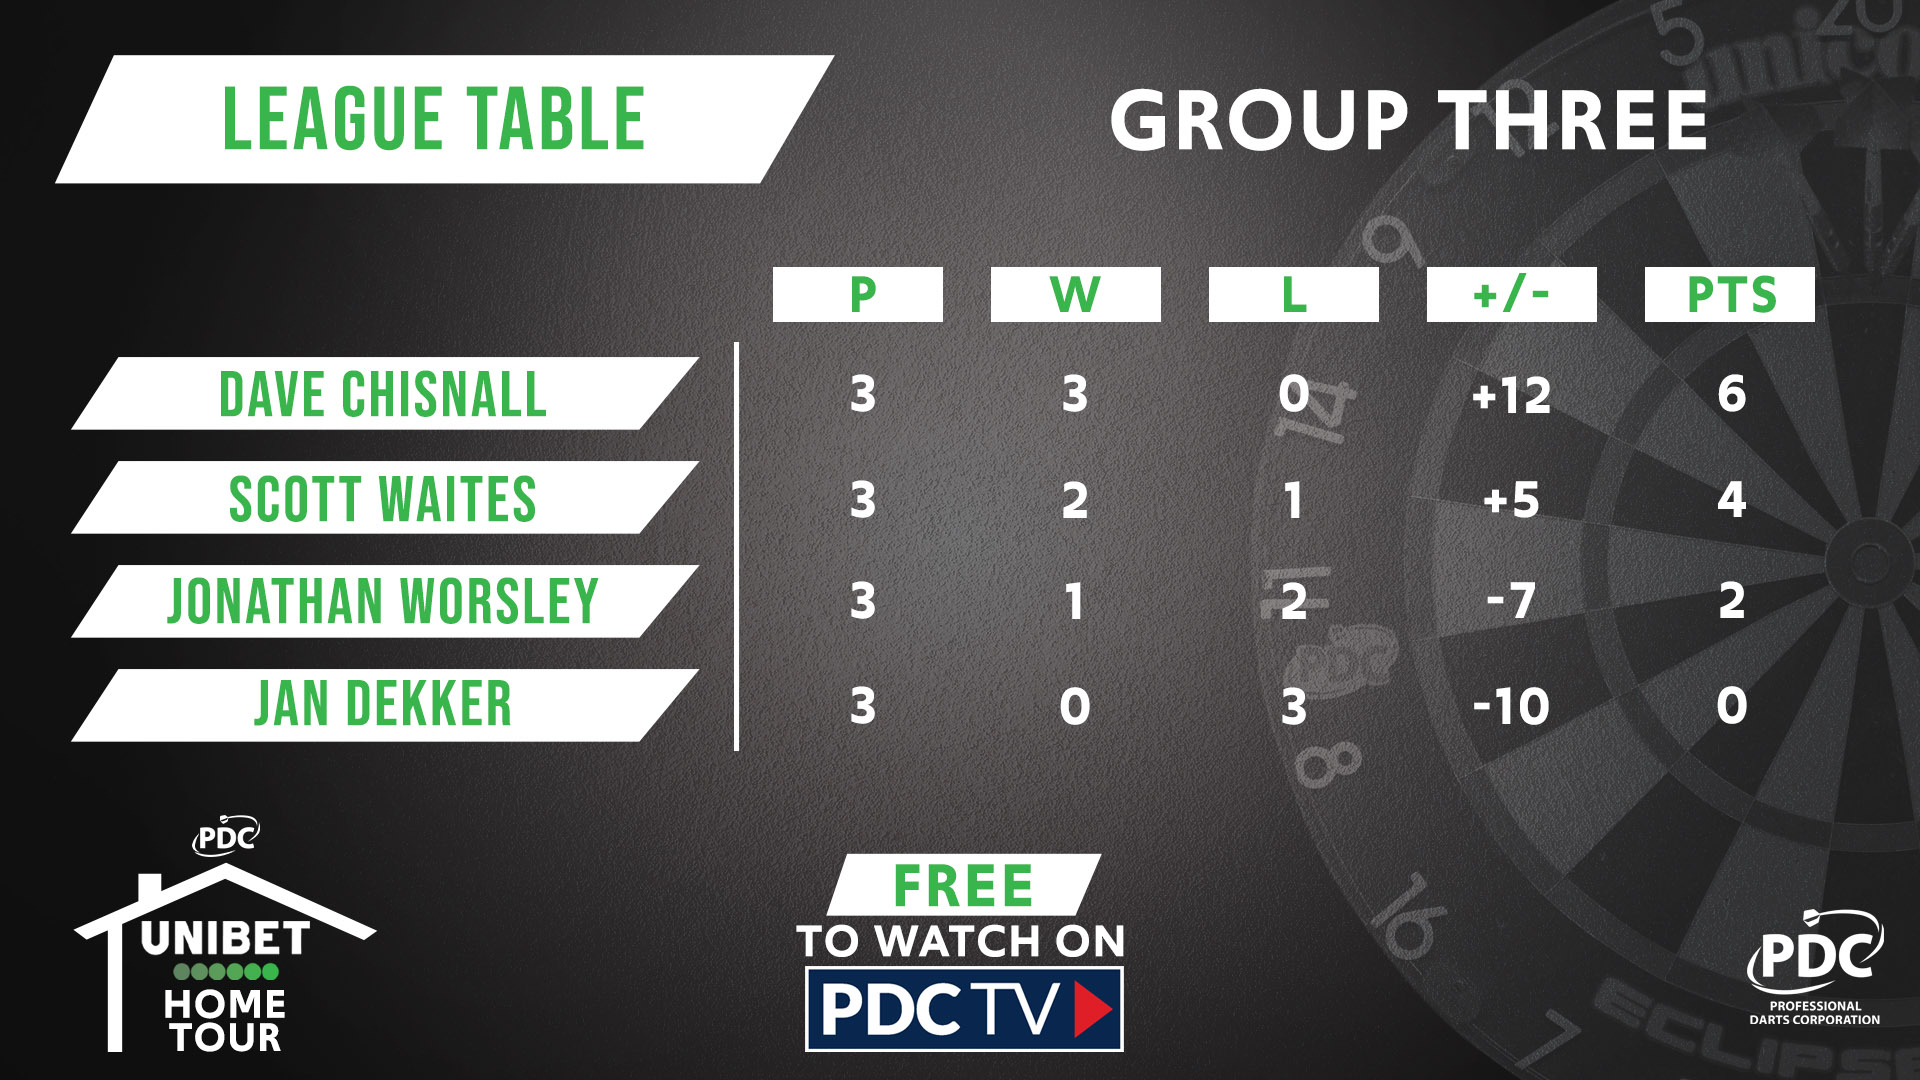 Group Three table